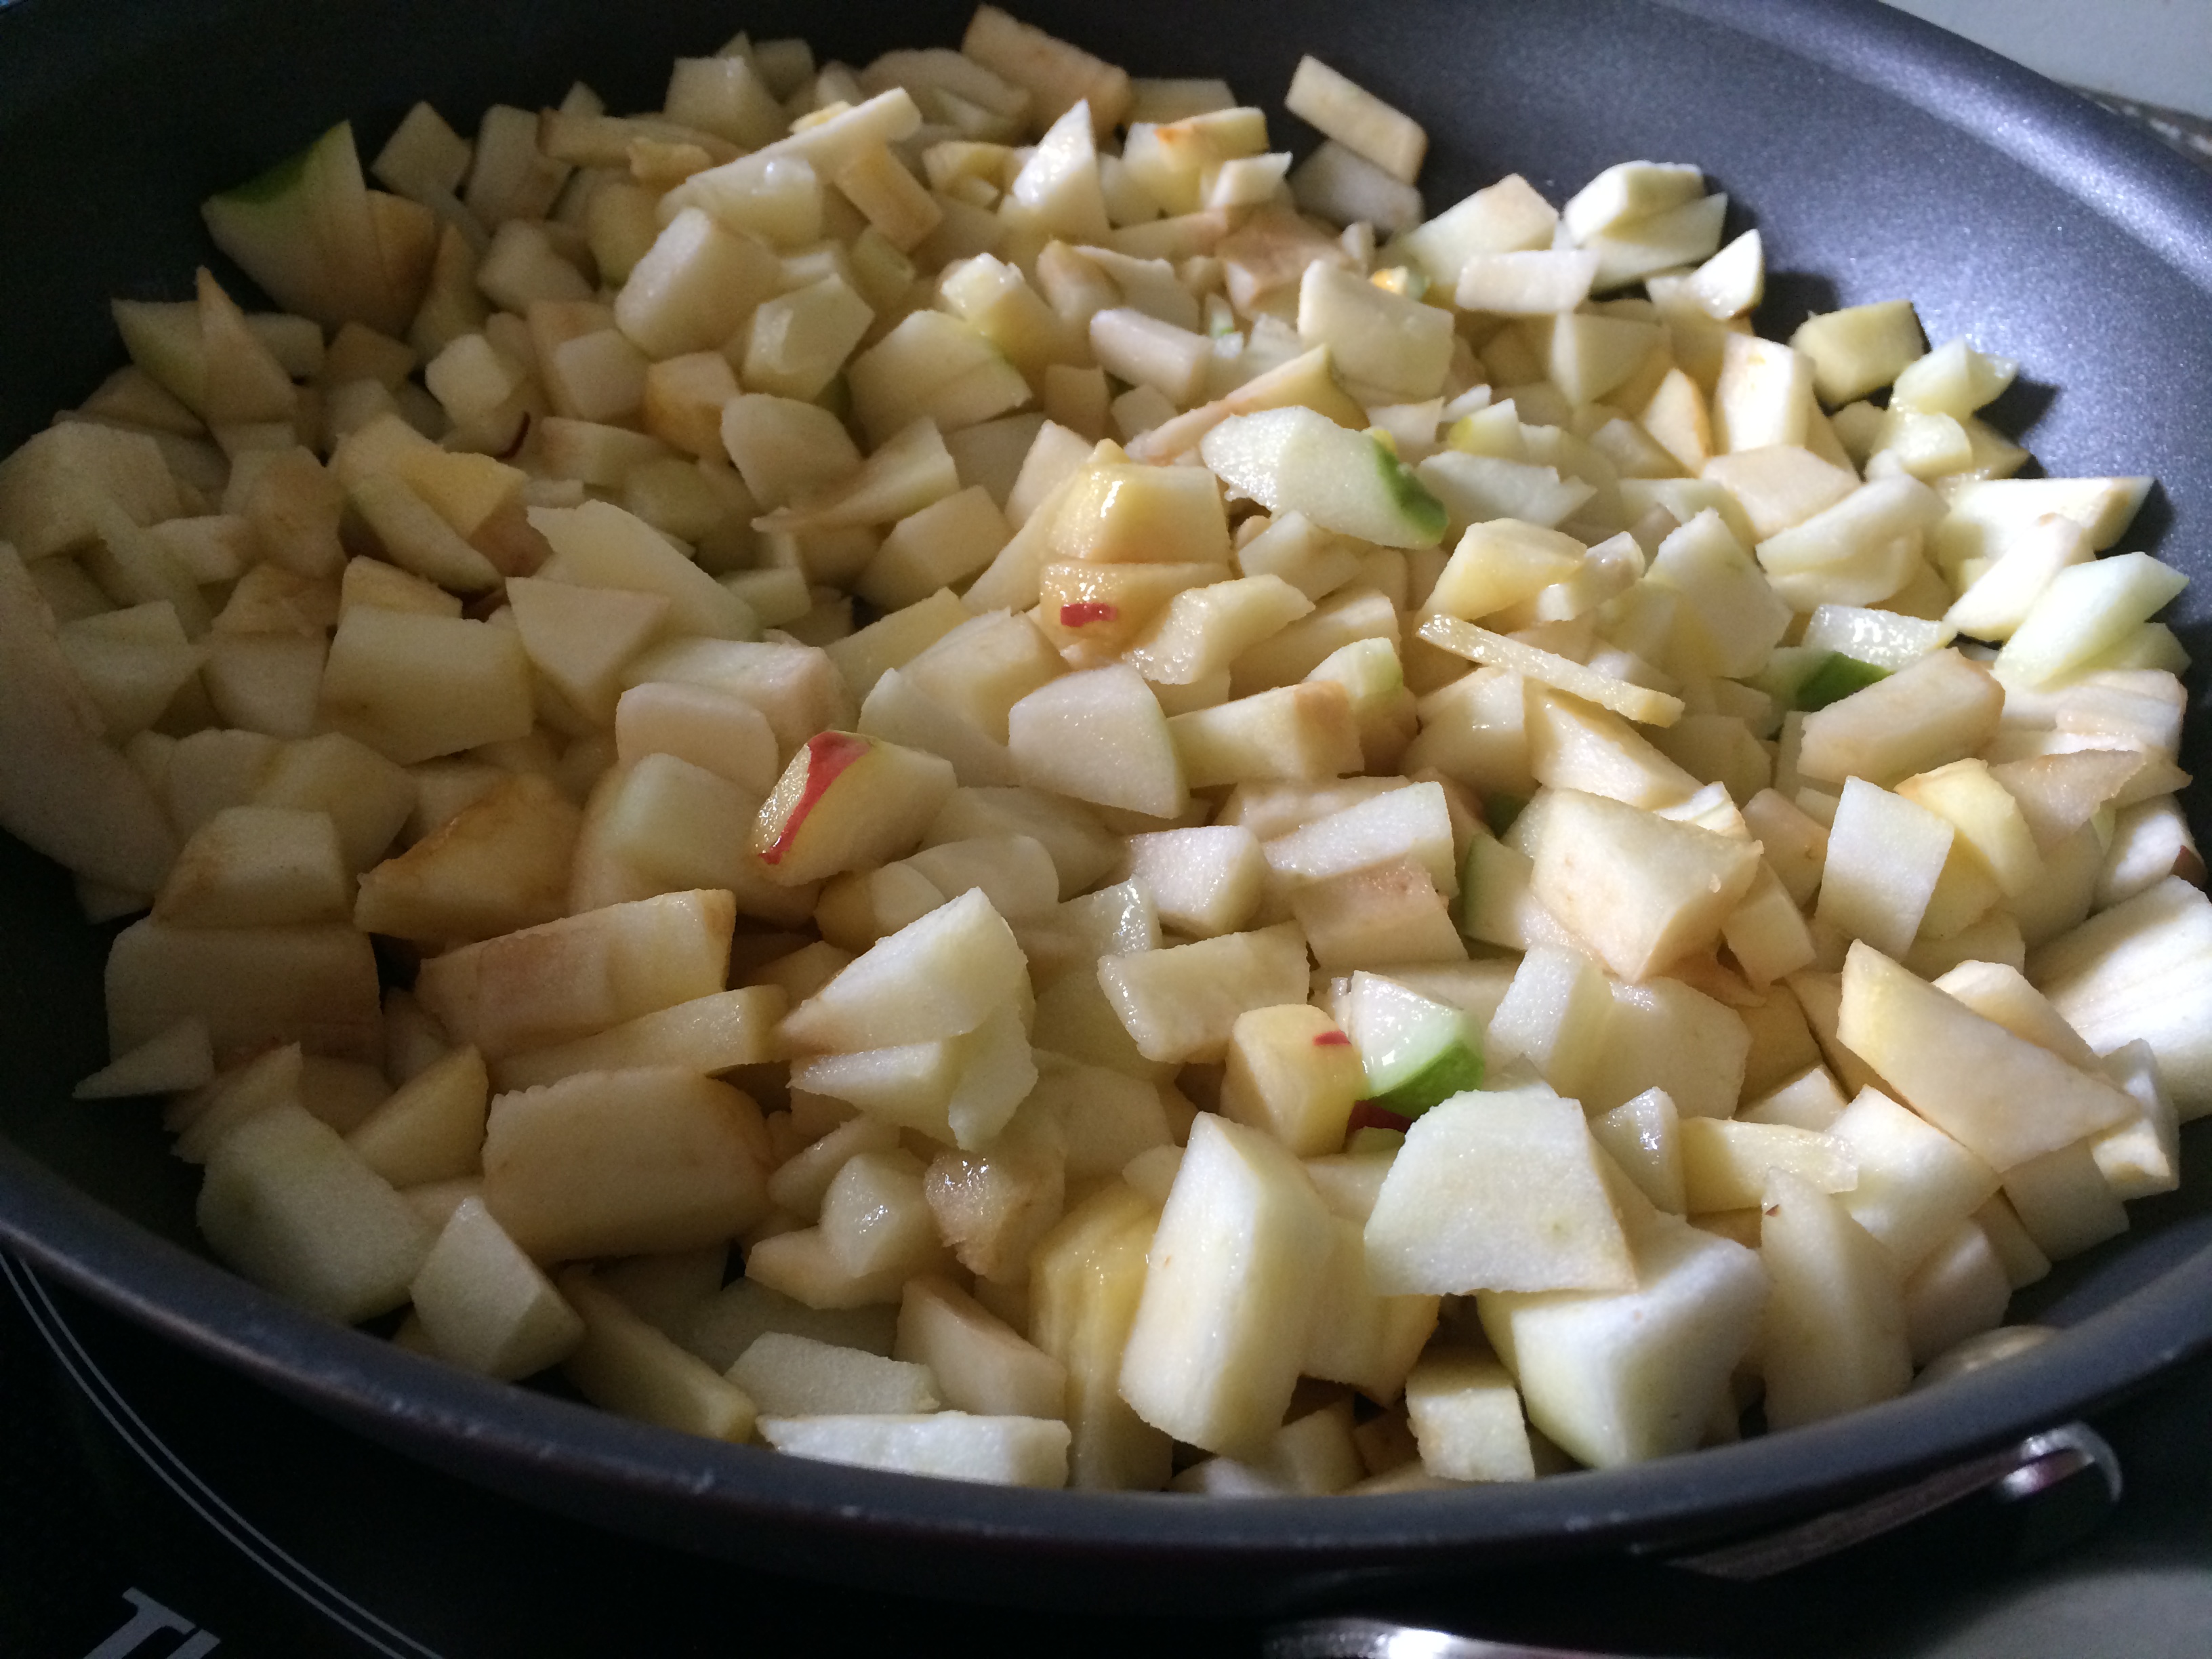 chopped apples in a frying pan